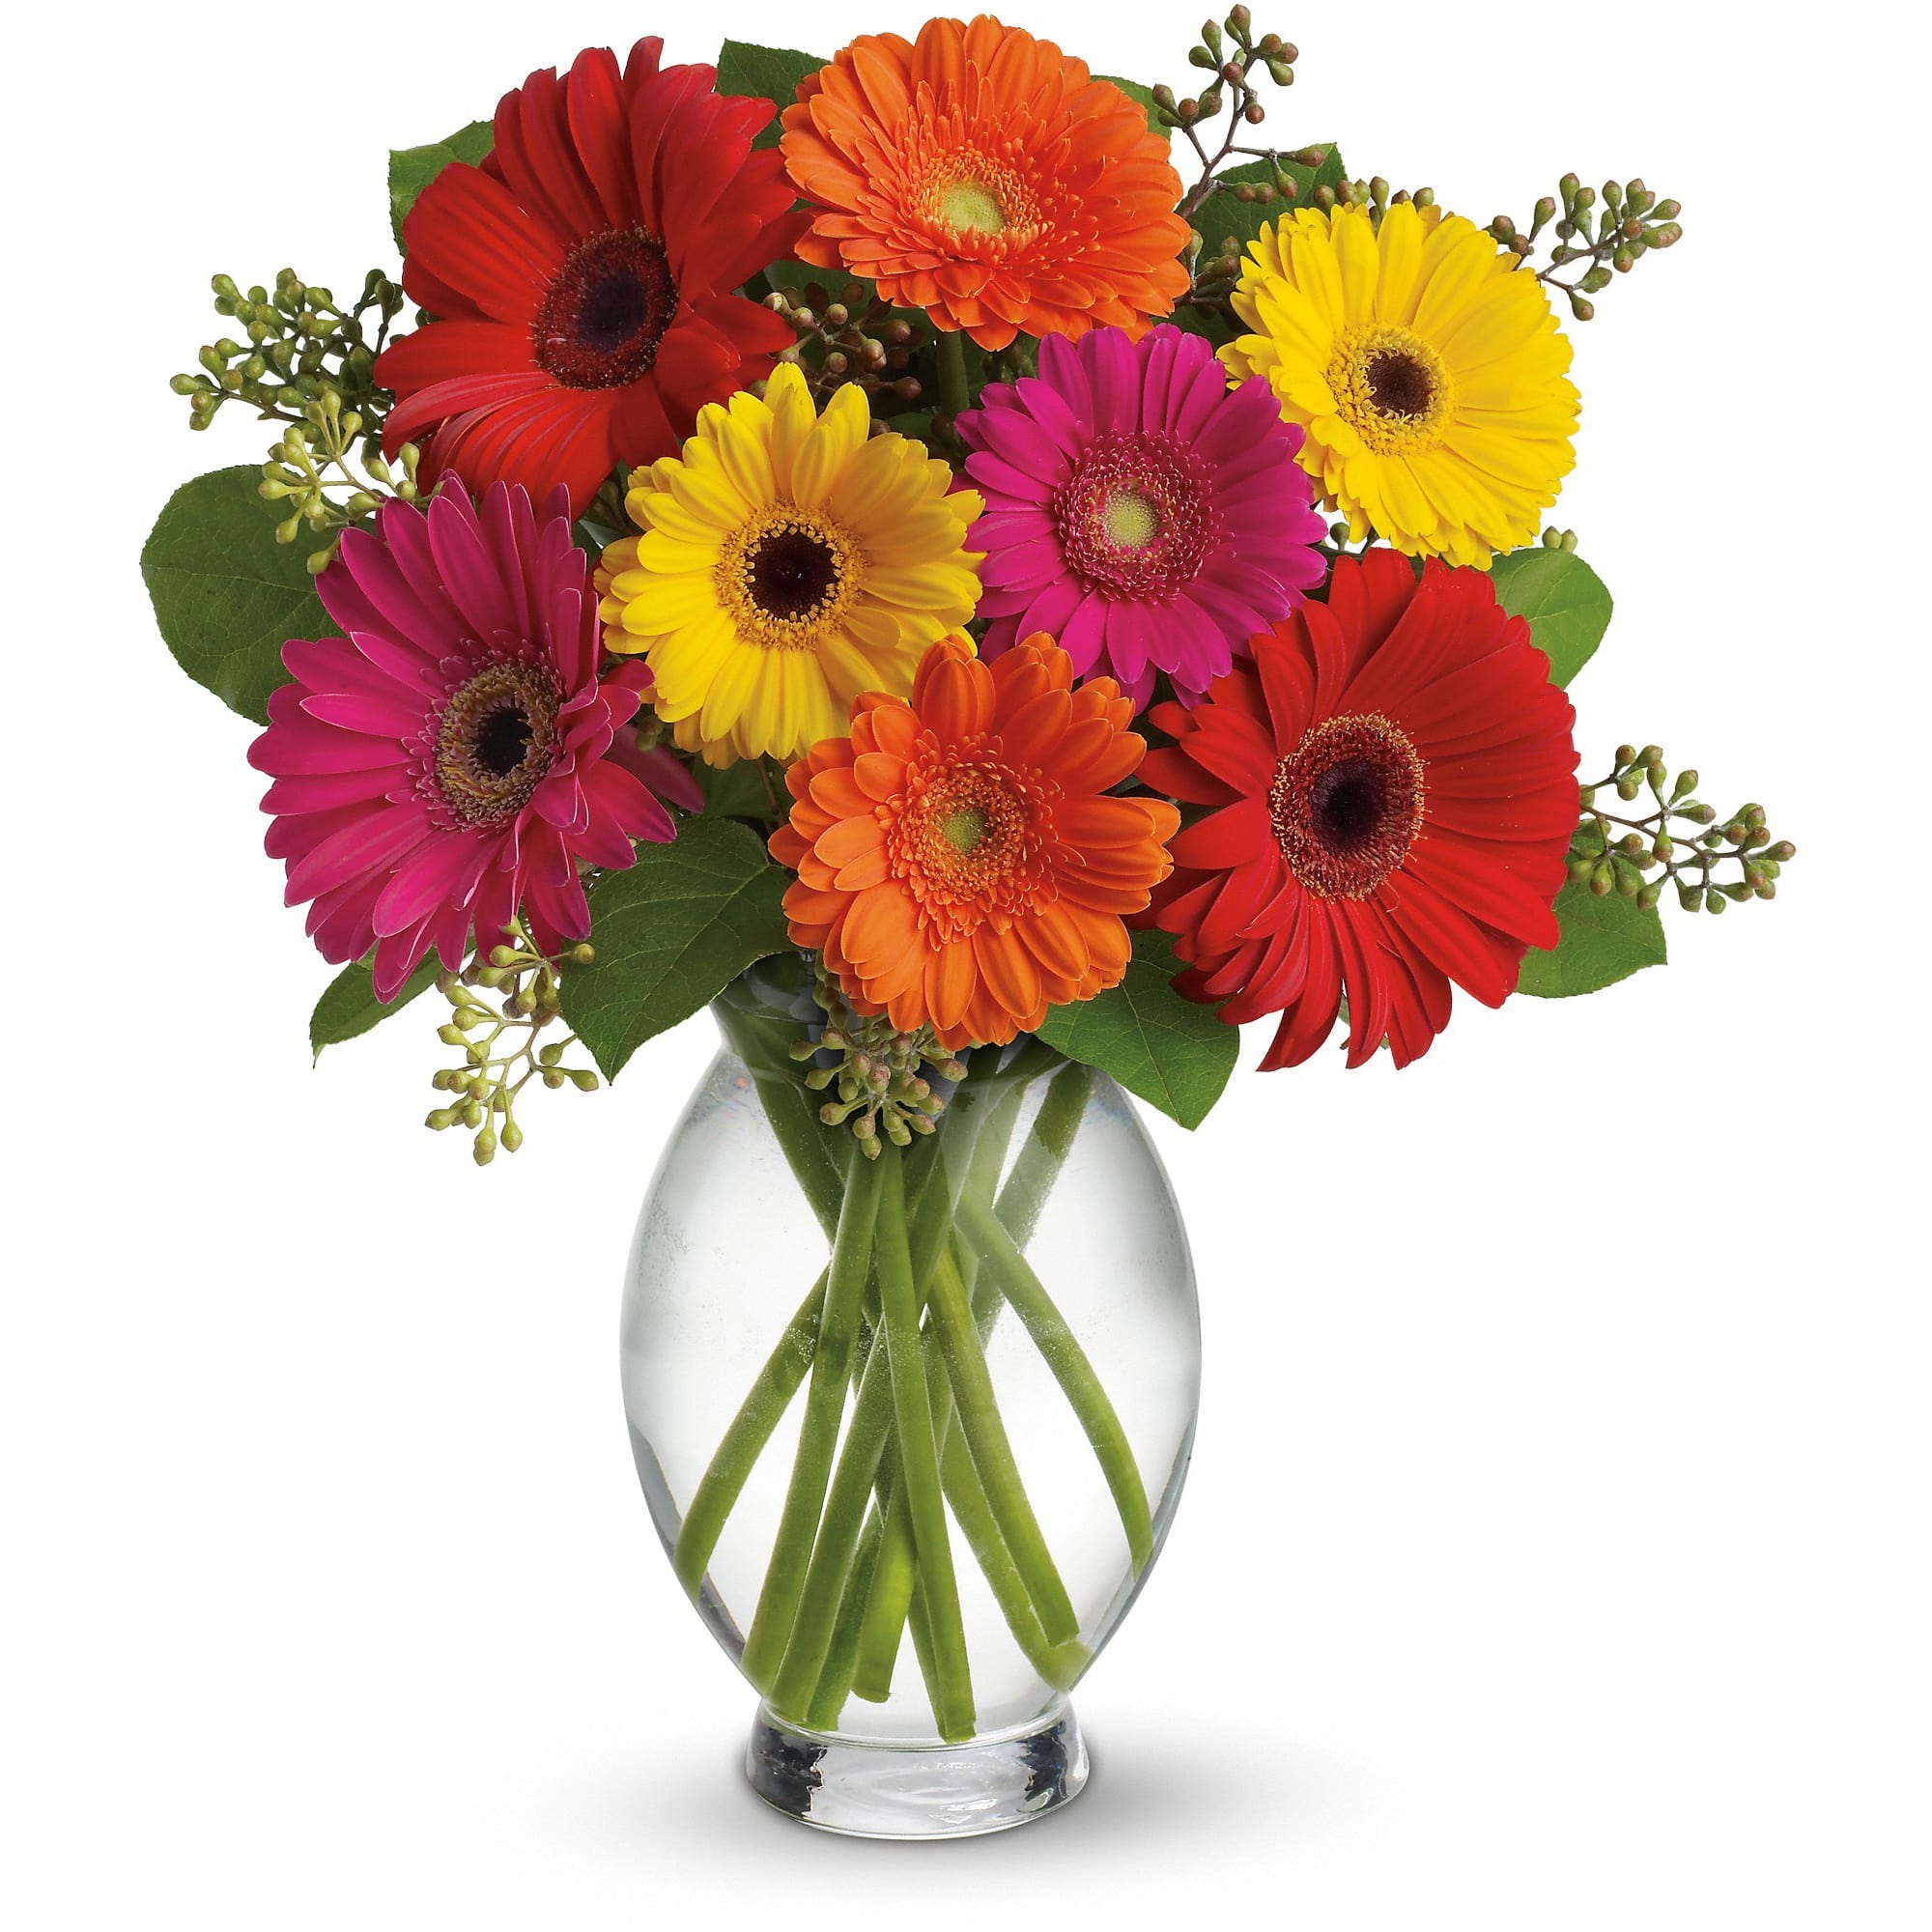 Bright Daisy Day - Sending this bouquet just might be your brightest idea of the summer! Gerberas are so full of color, charisma and character, and this arrangement showcases their glory. 